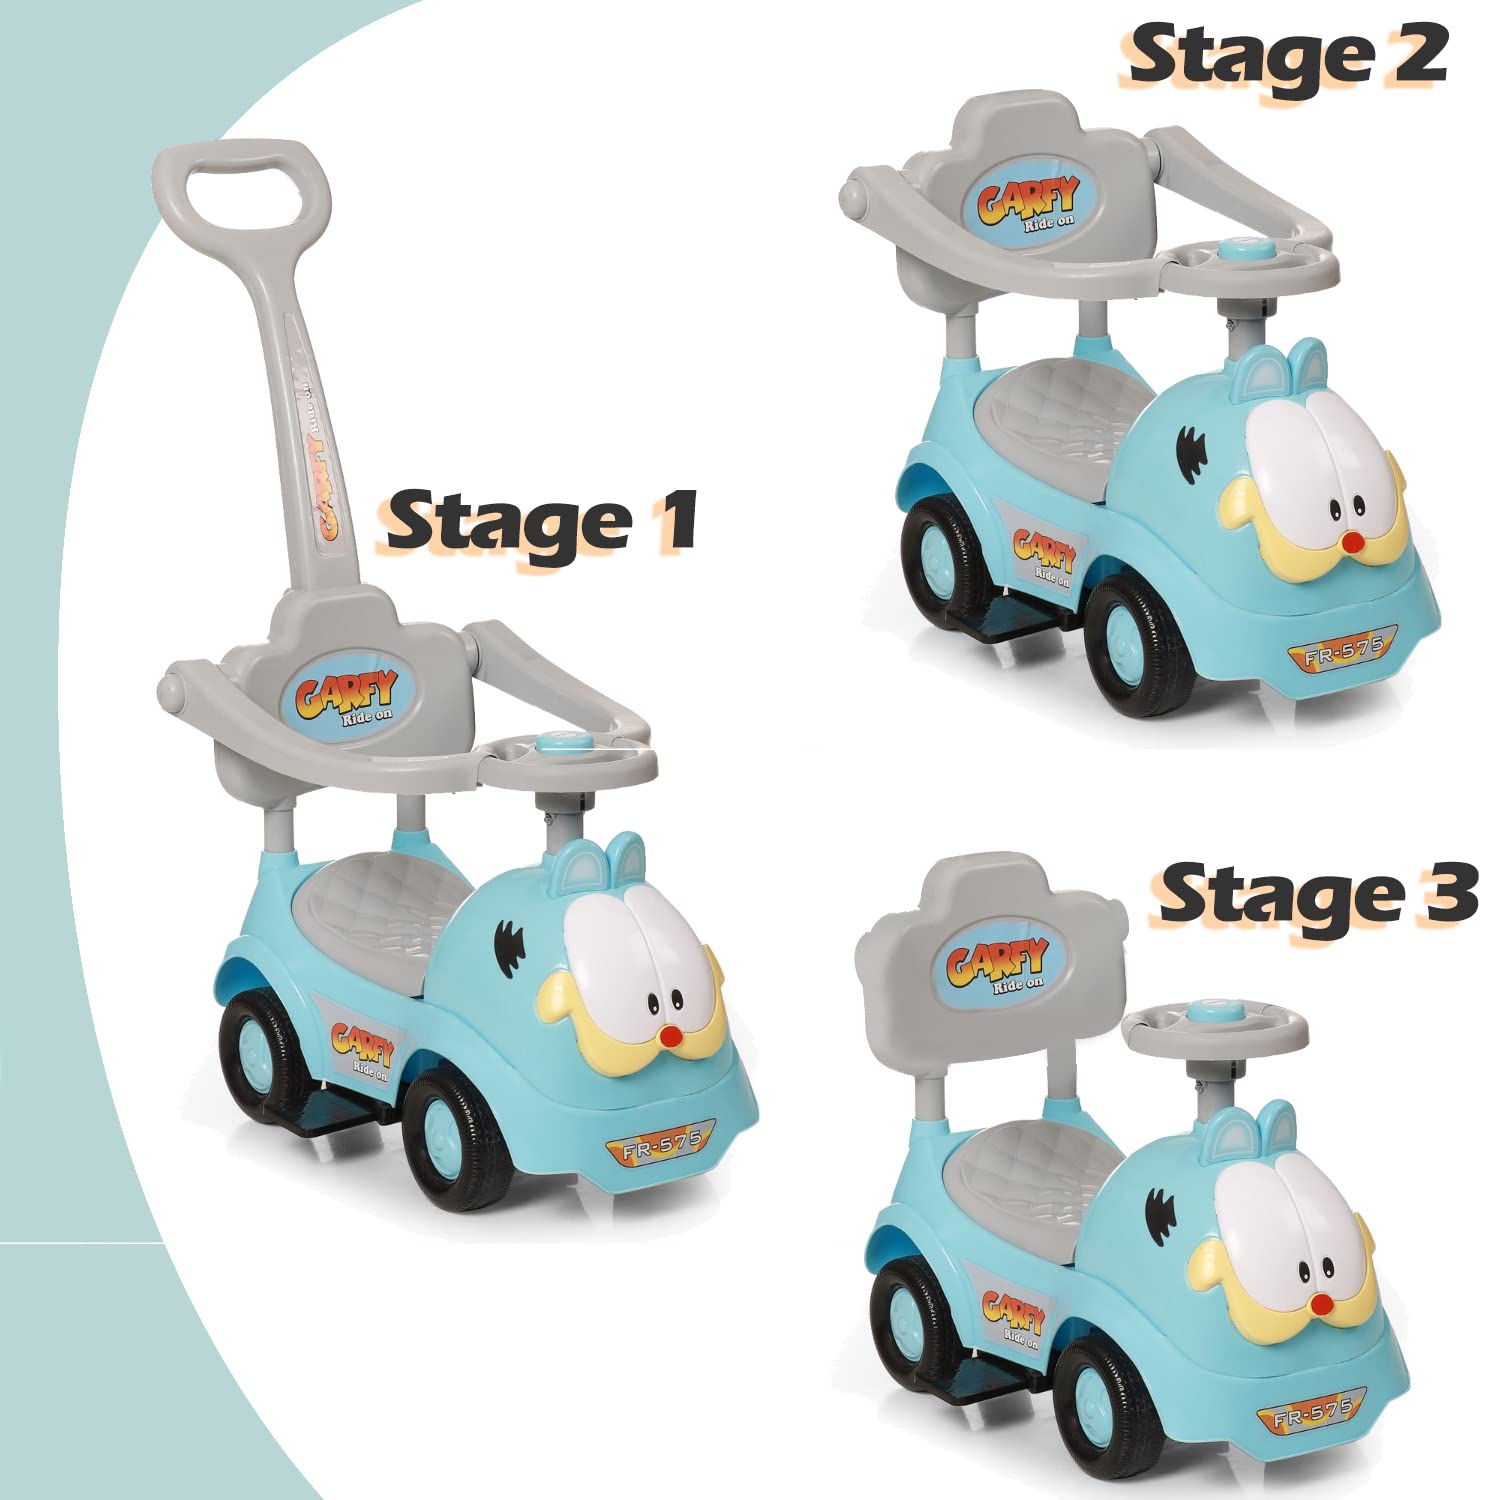 Push Car Rabbit Ride-on Toy Car Rider with Music Horn, Backrest and Under Seat Storage Utility Box for Boys and Girls of Age 1-3 Years